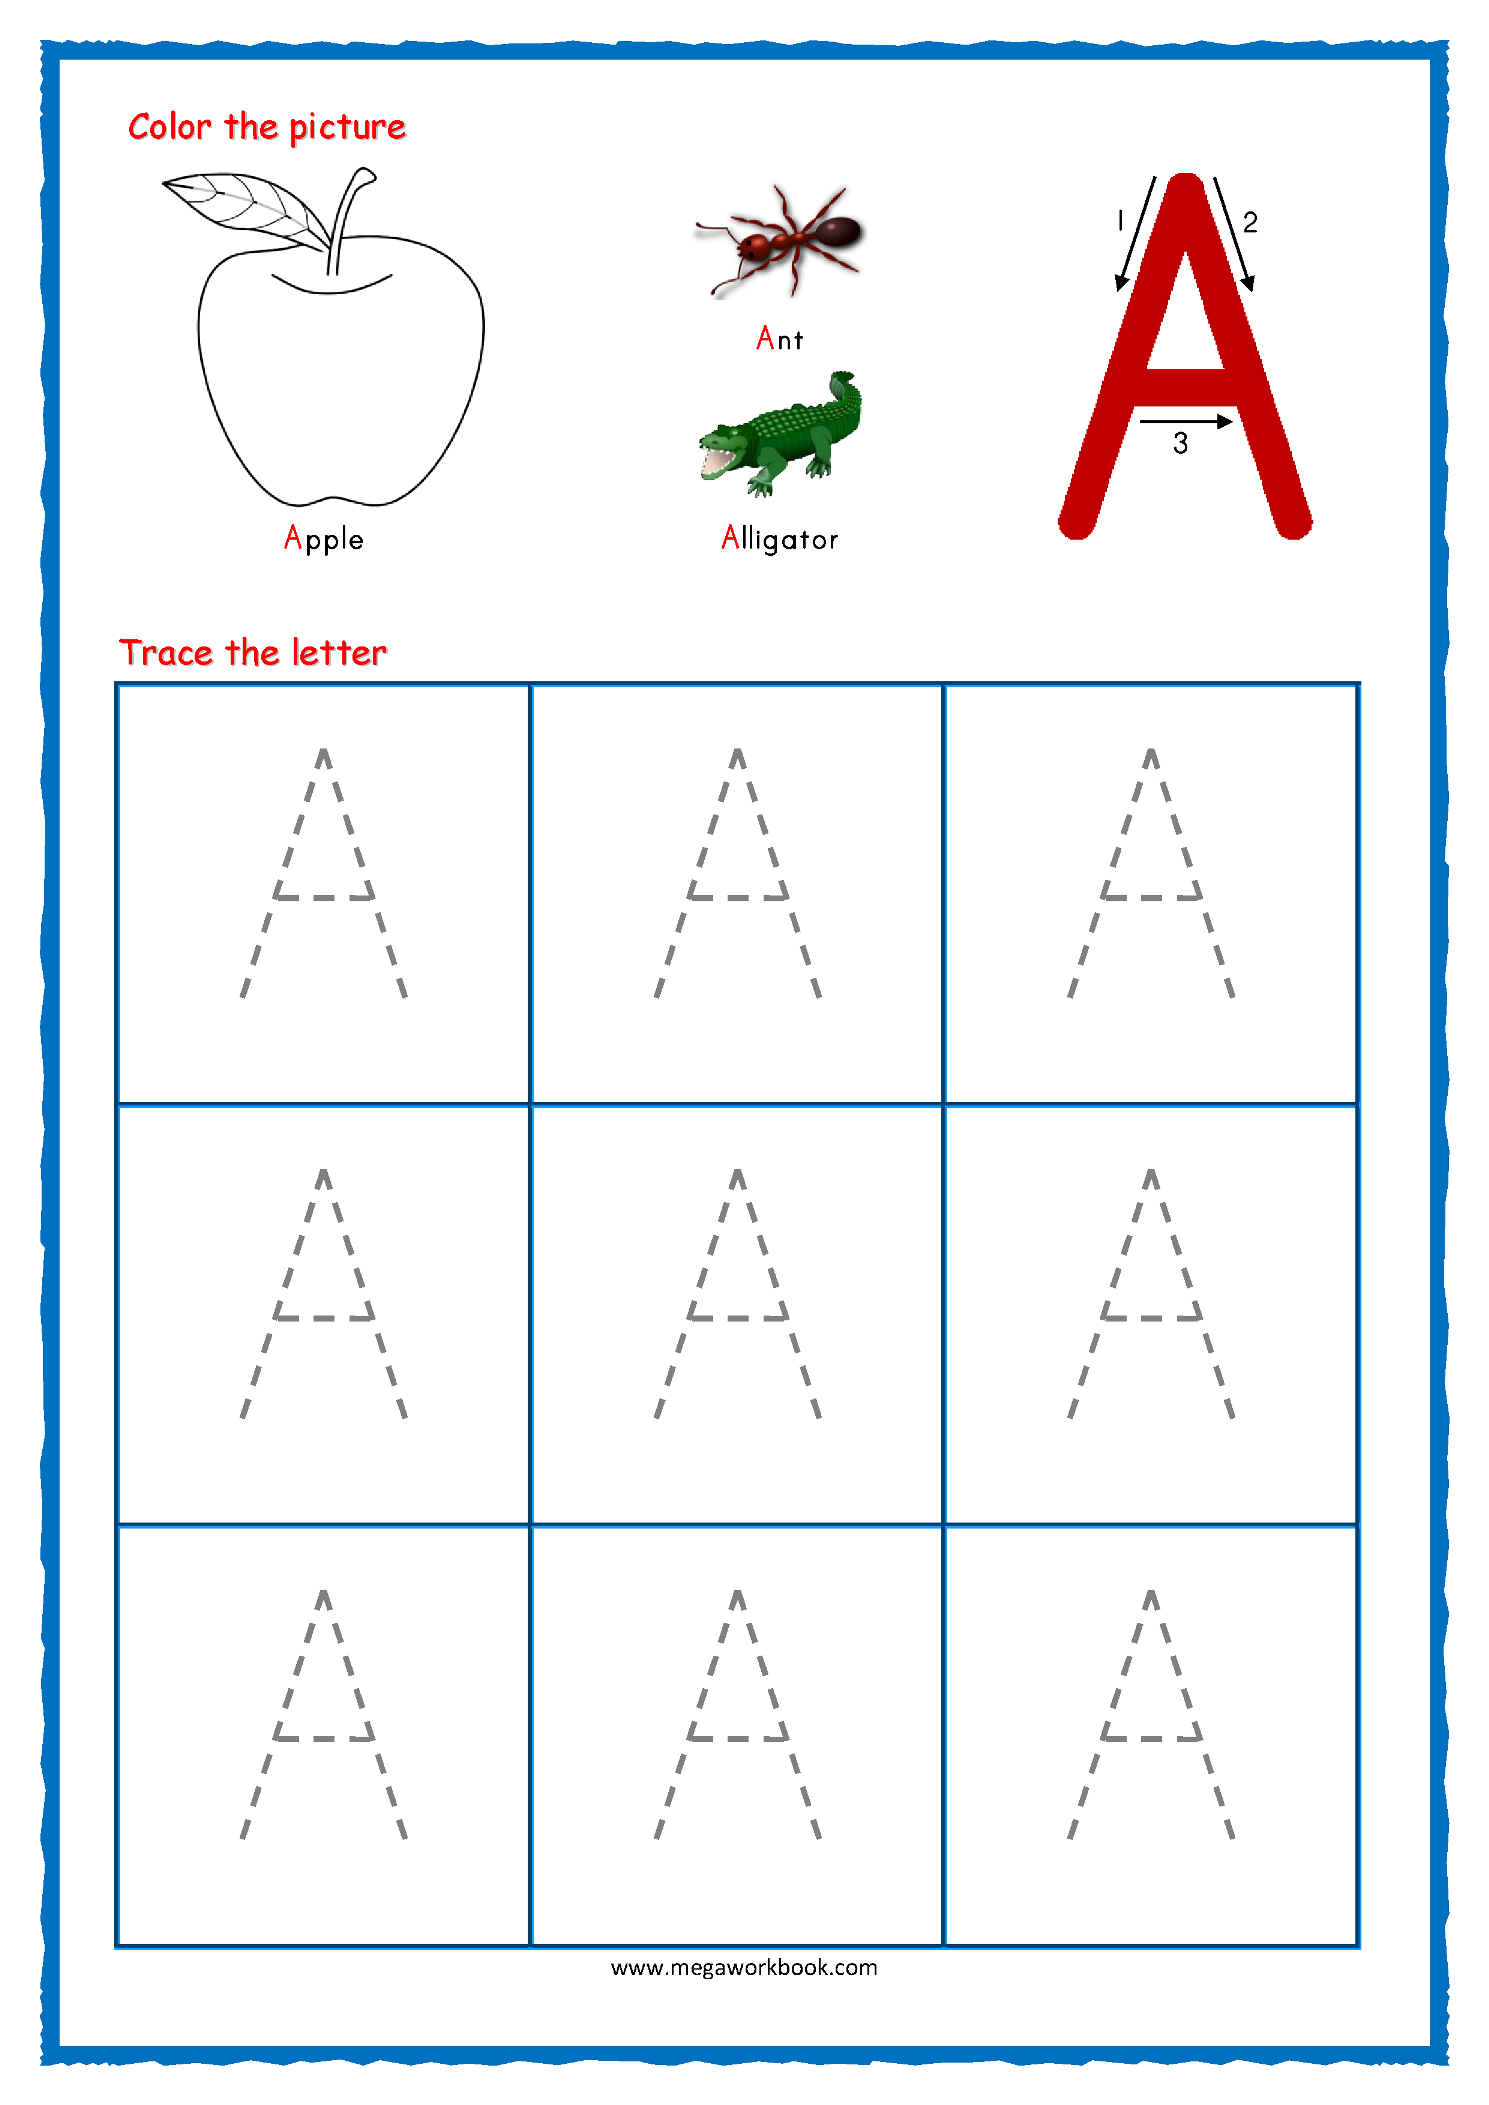 Tracing Letters - Alphabet Tracing - Capital Letters in Alphabet Tracing Activities For Preschoolers